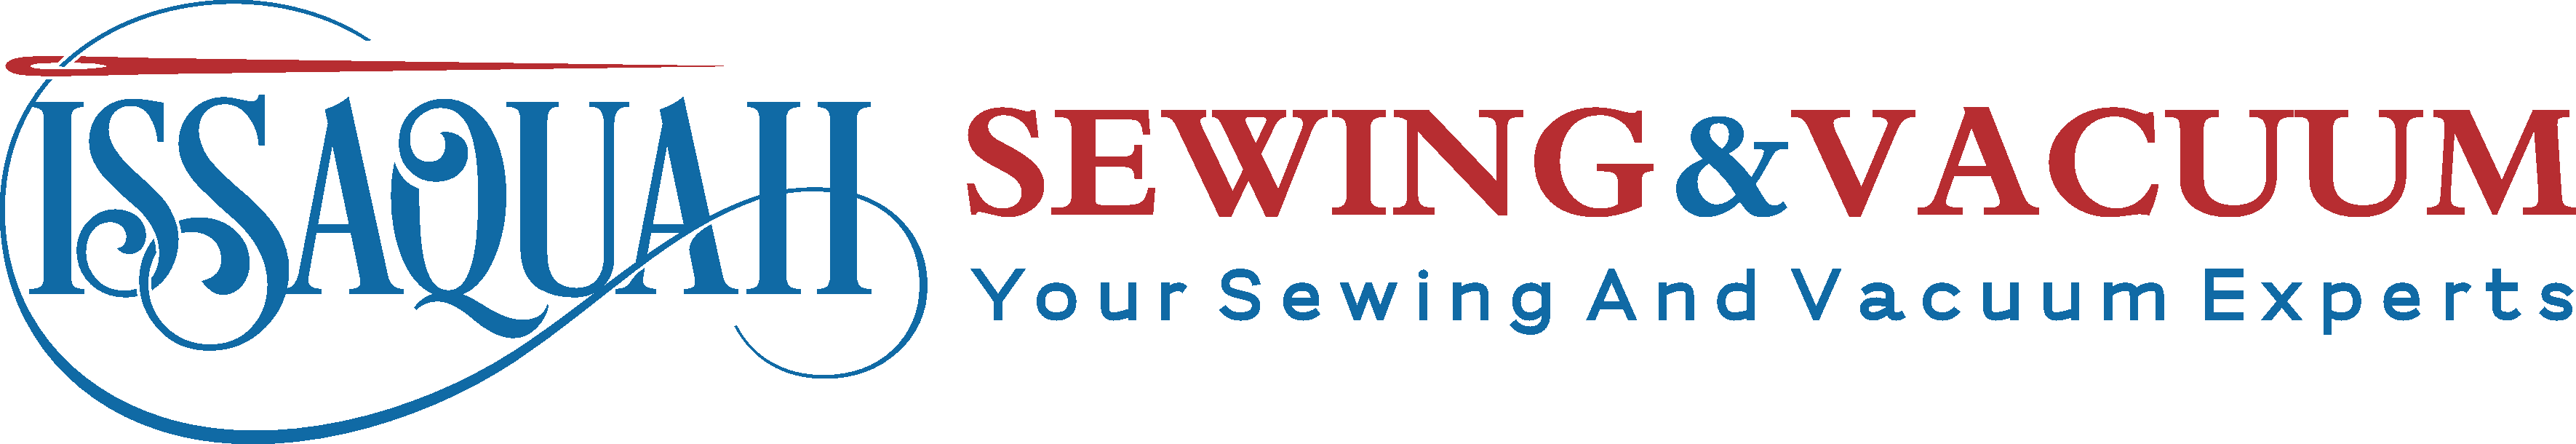 Issaquah Sewing And Vacuum